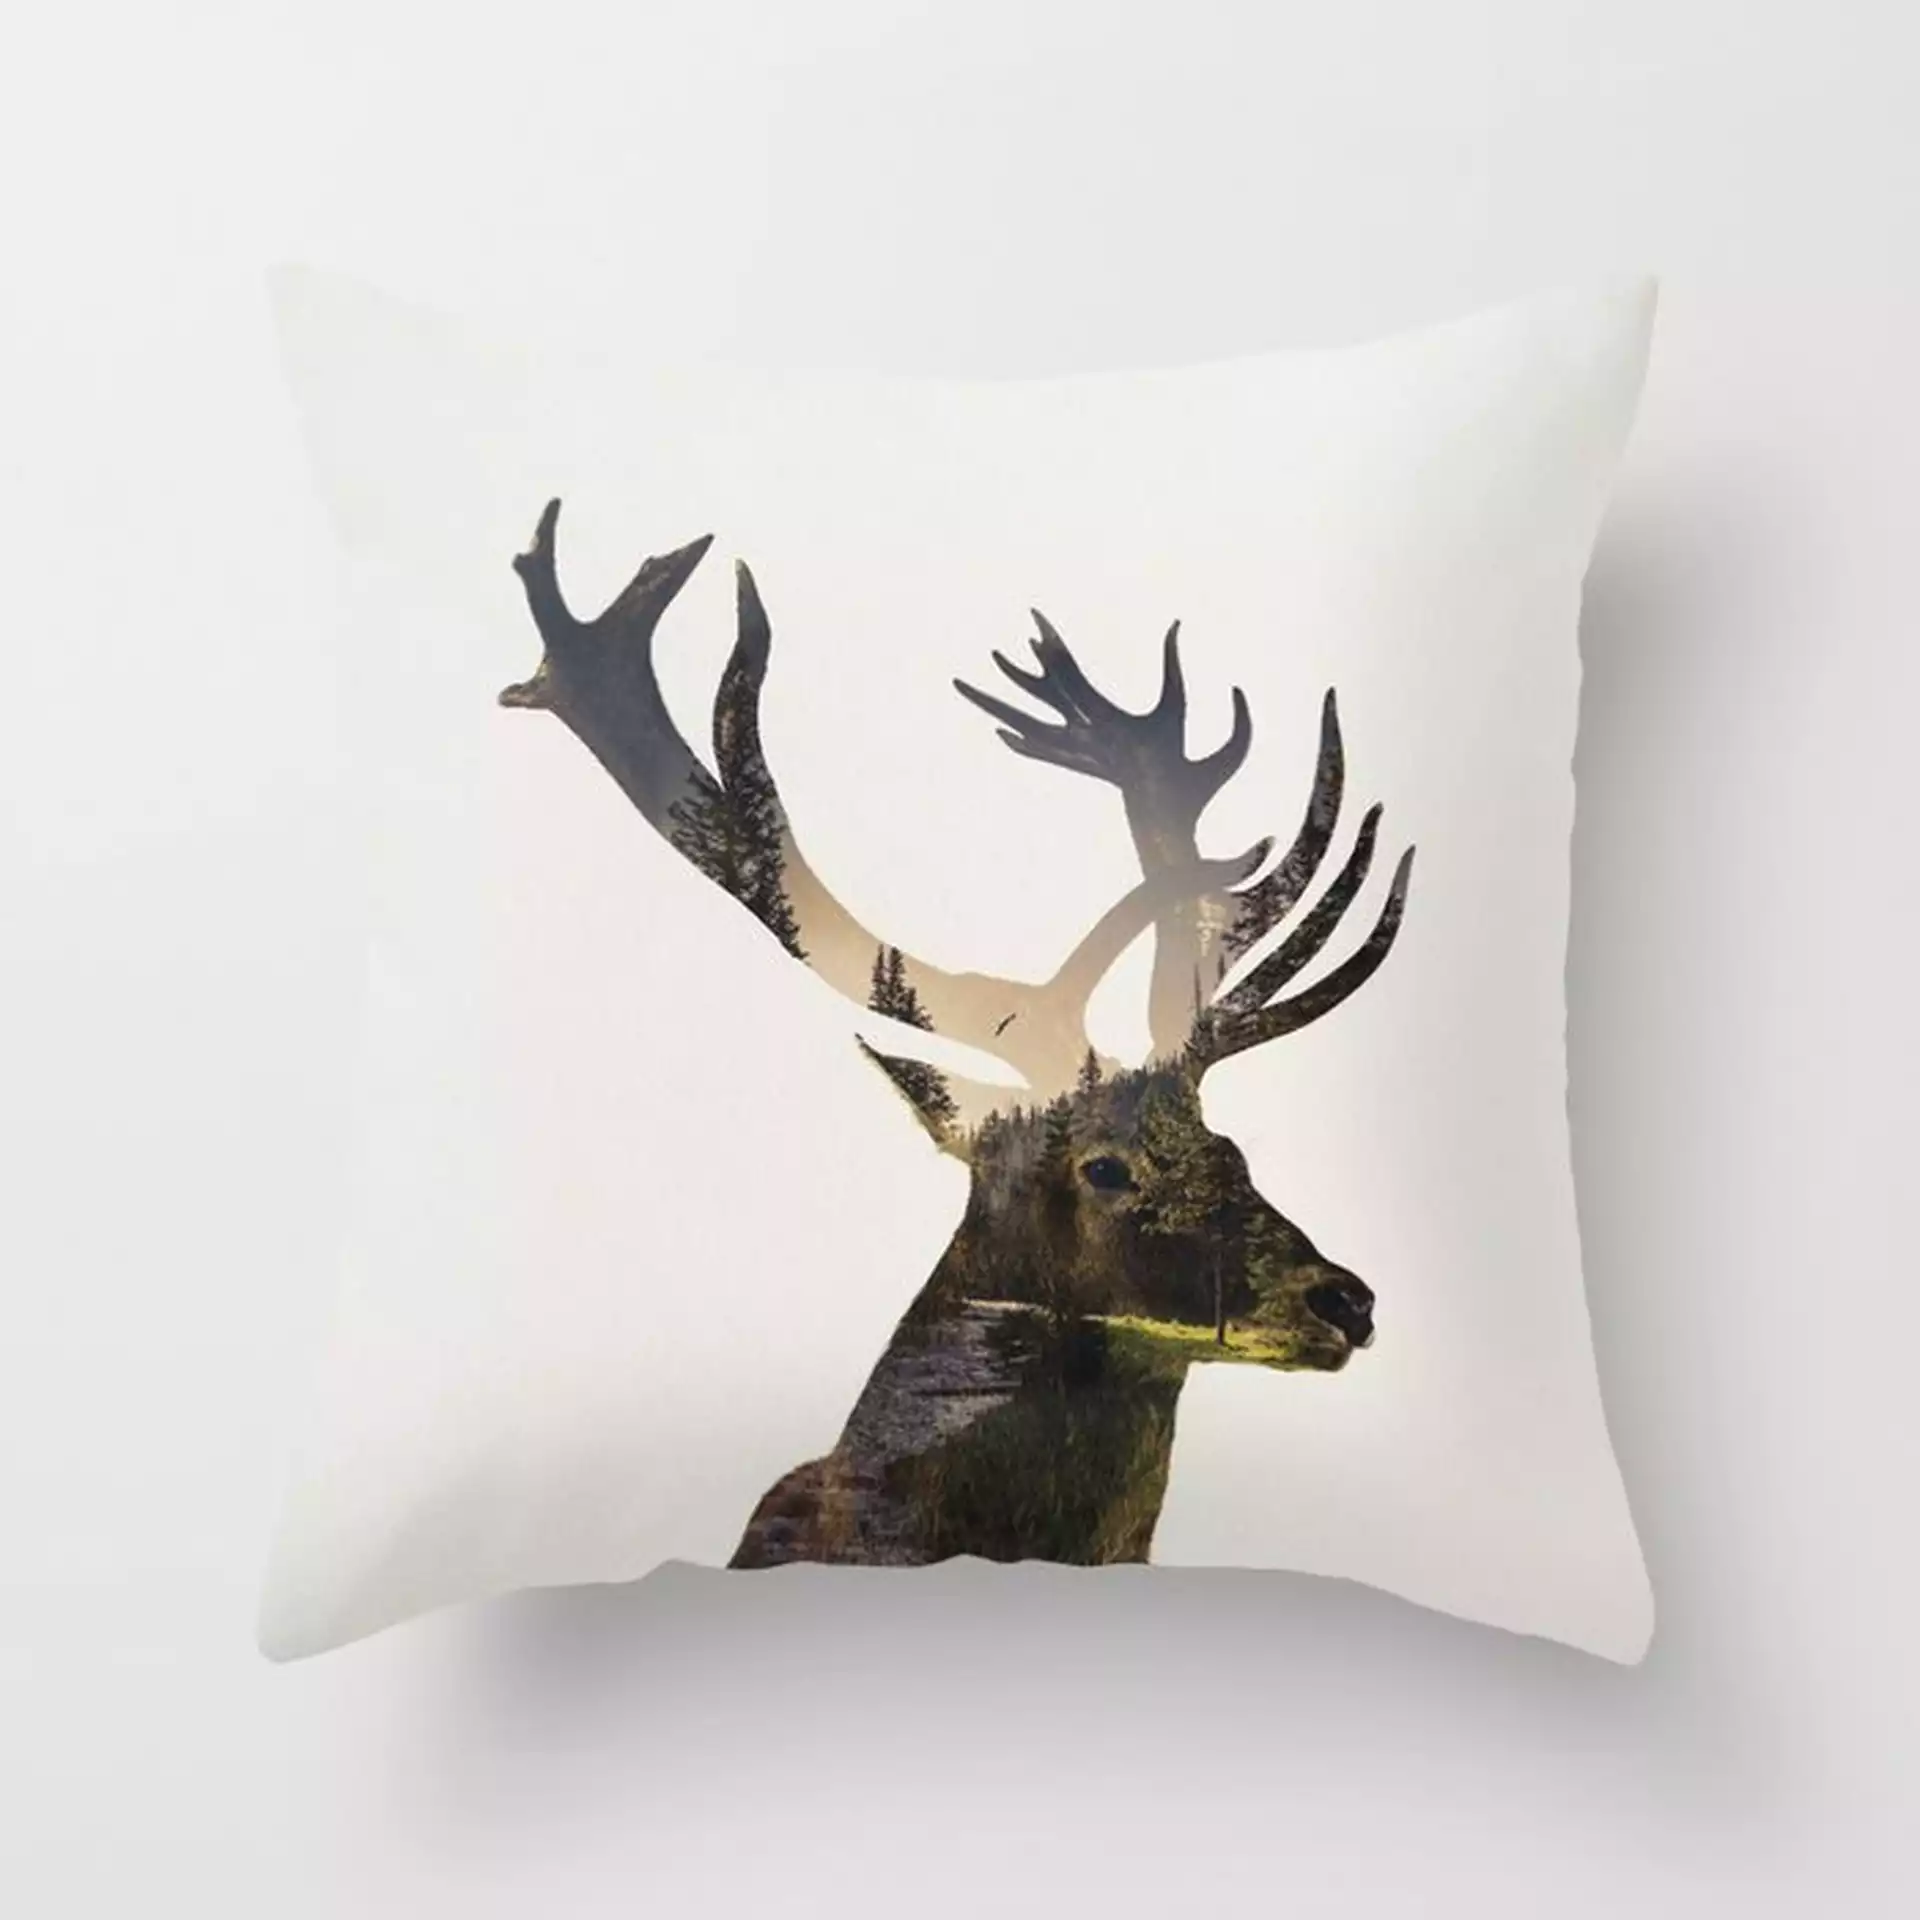 Deer Couch Throw Pillow by Andreas Lie - Cover (24" x 24") with pillow insert - Indoor Pillow